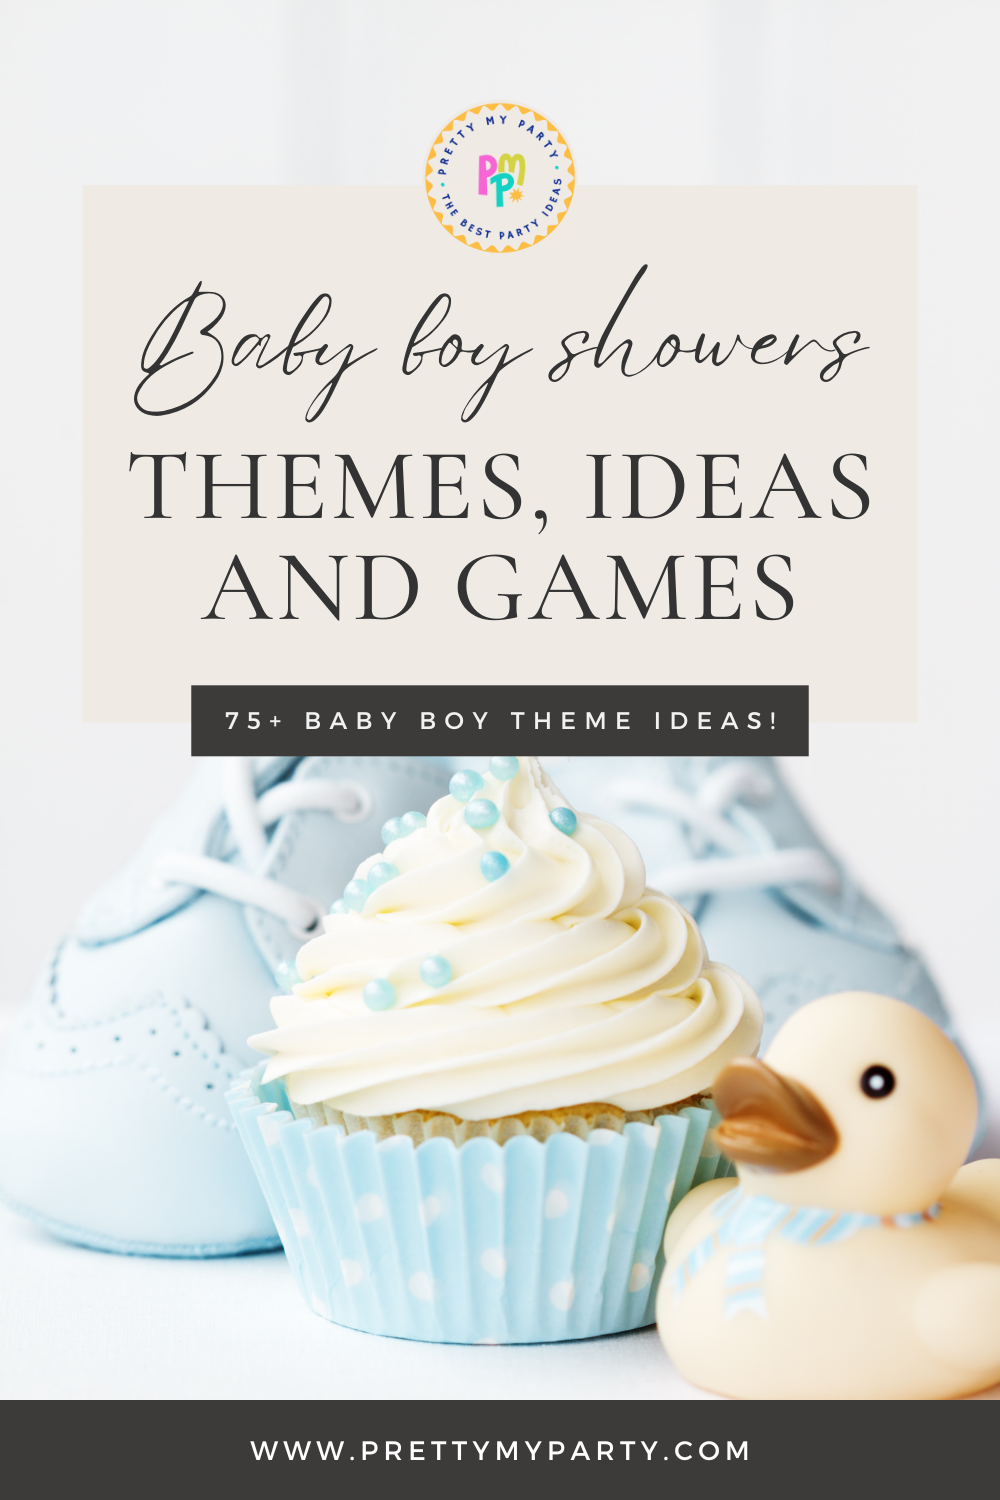 Best baby boy shower themes and ideas with games included on Pretty My Party